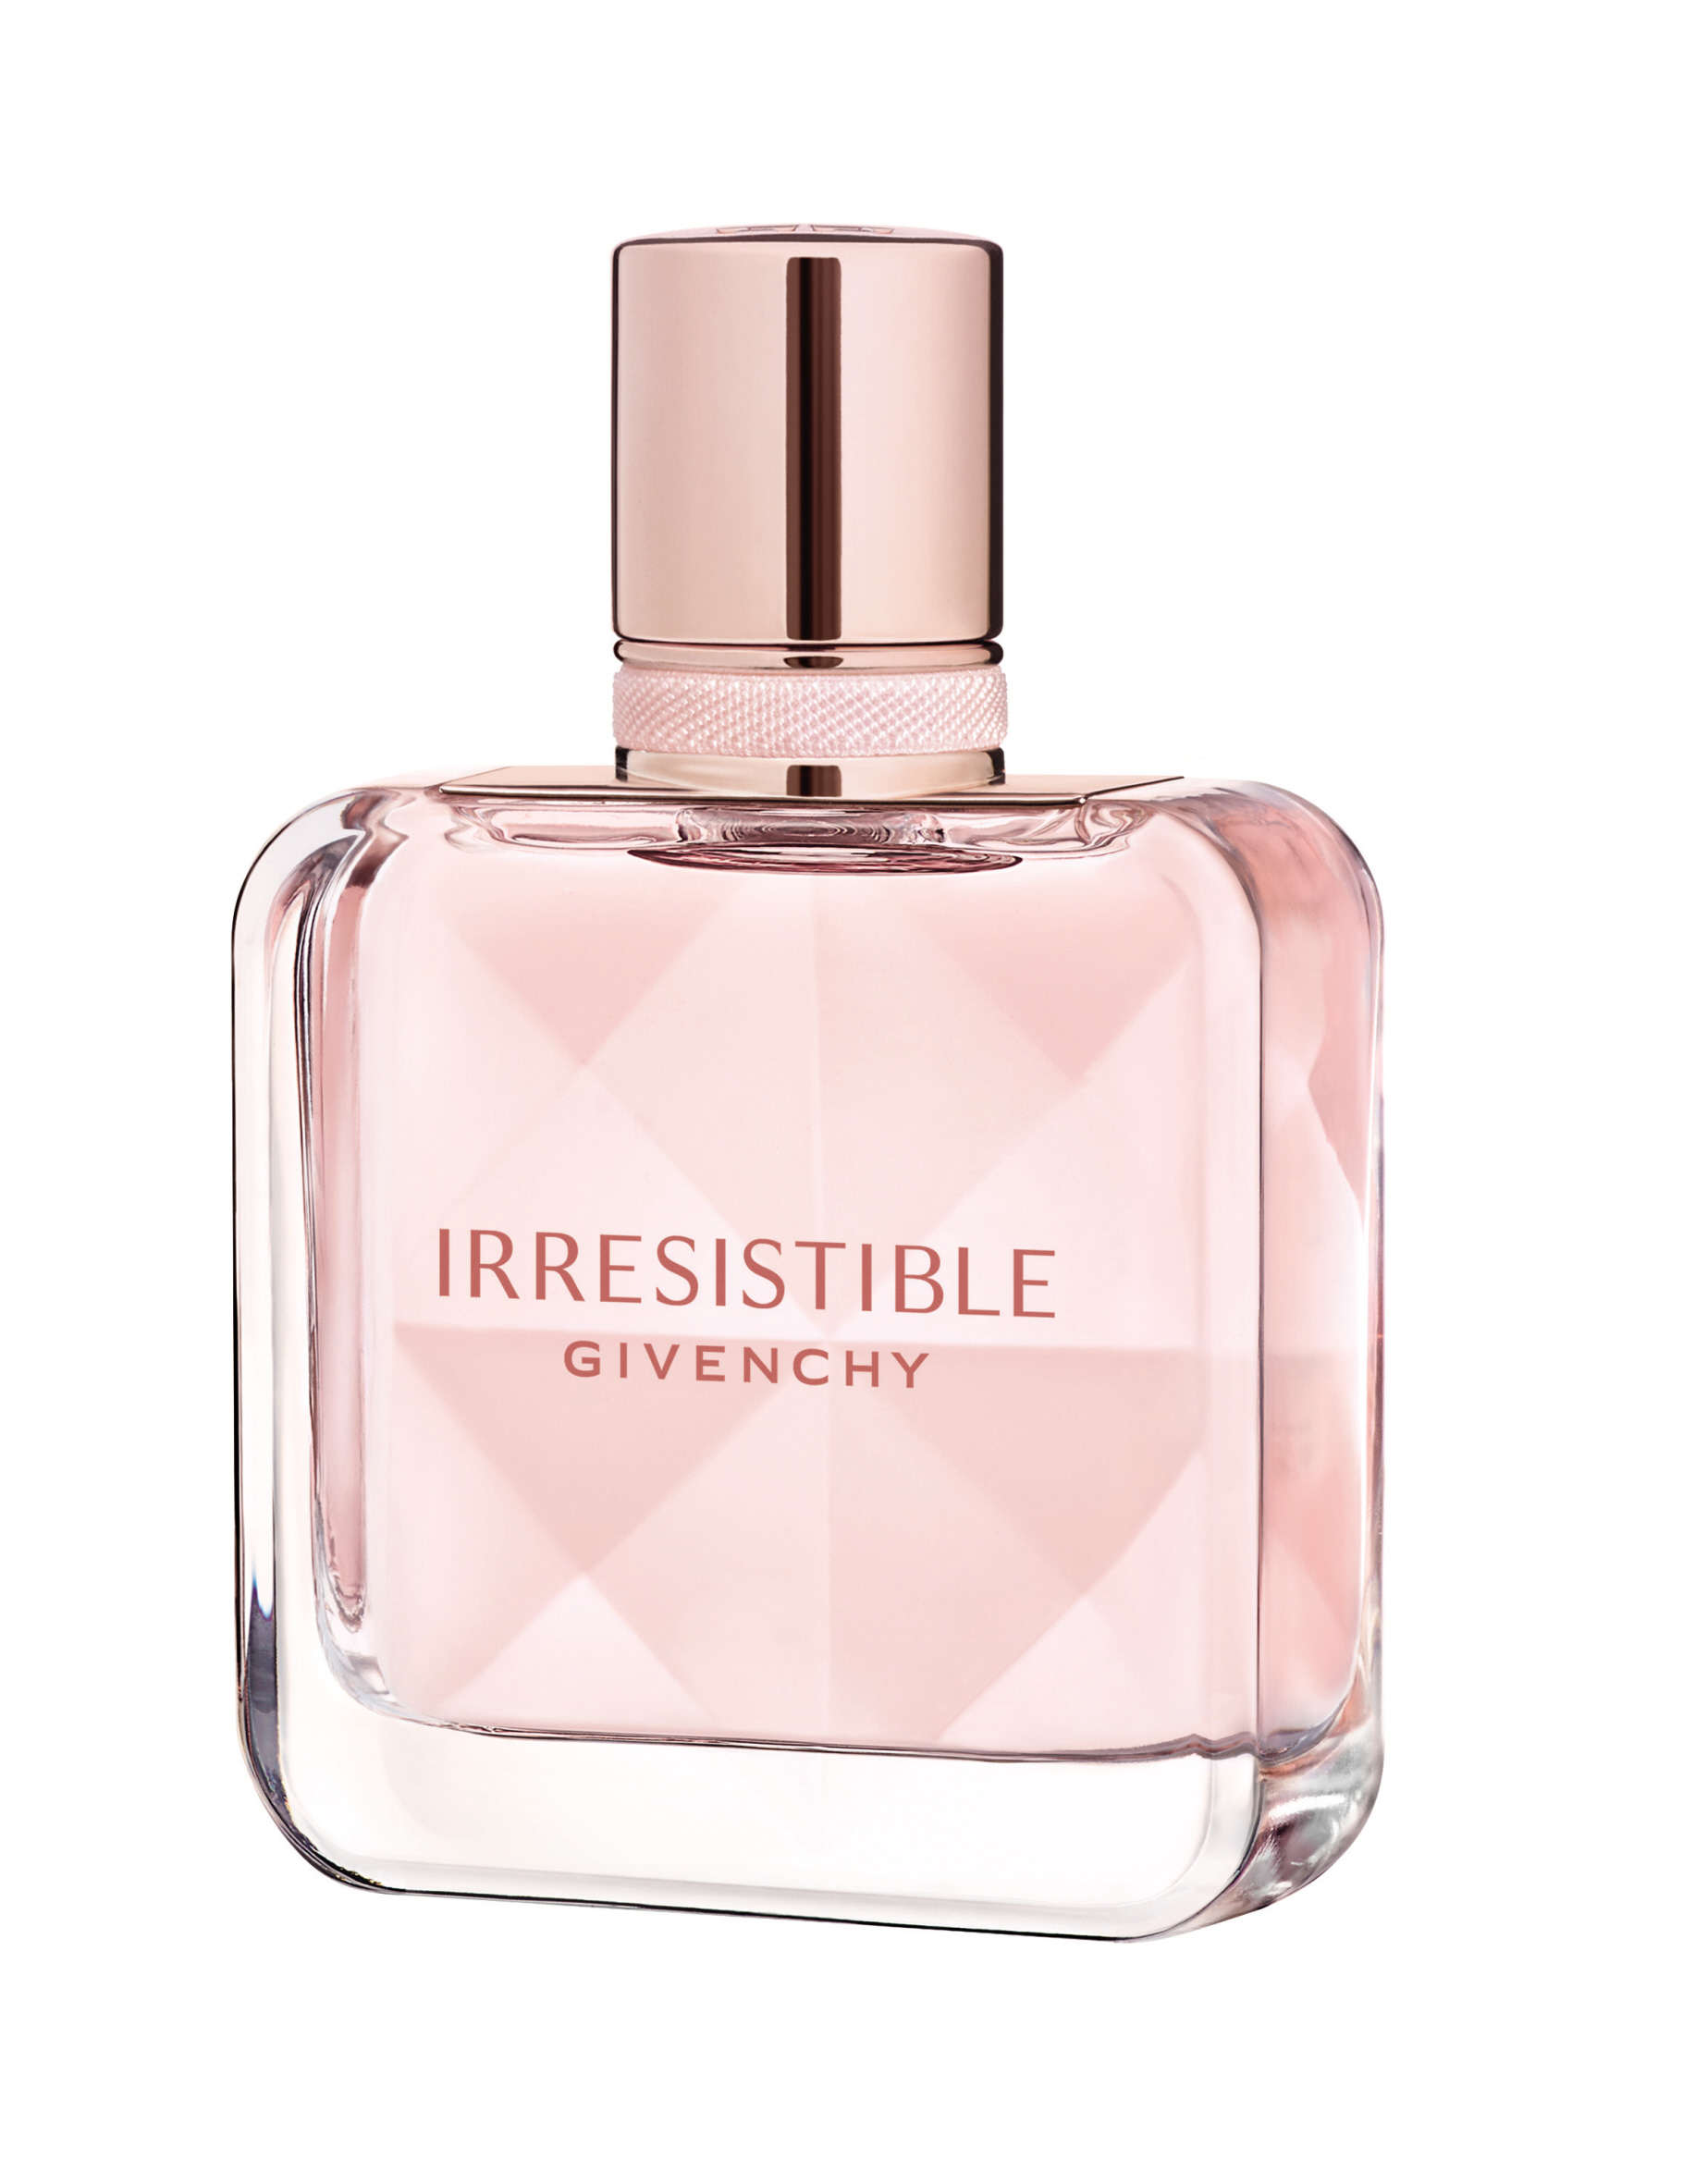 ‘Irresistible’ by Givenchy – FLAIR MAGAZINE